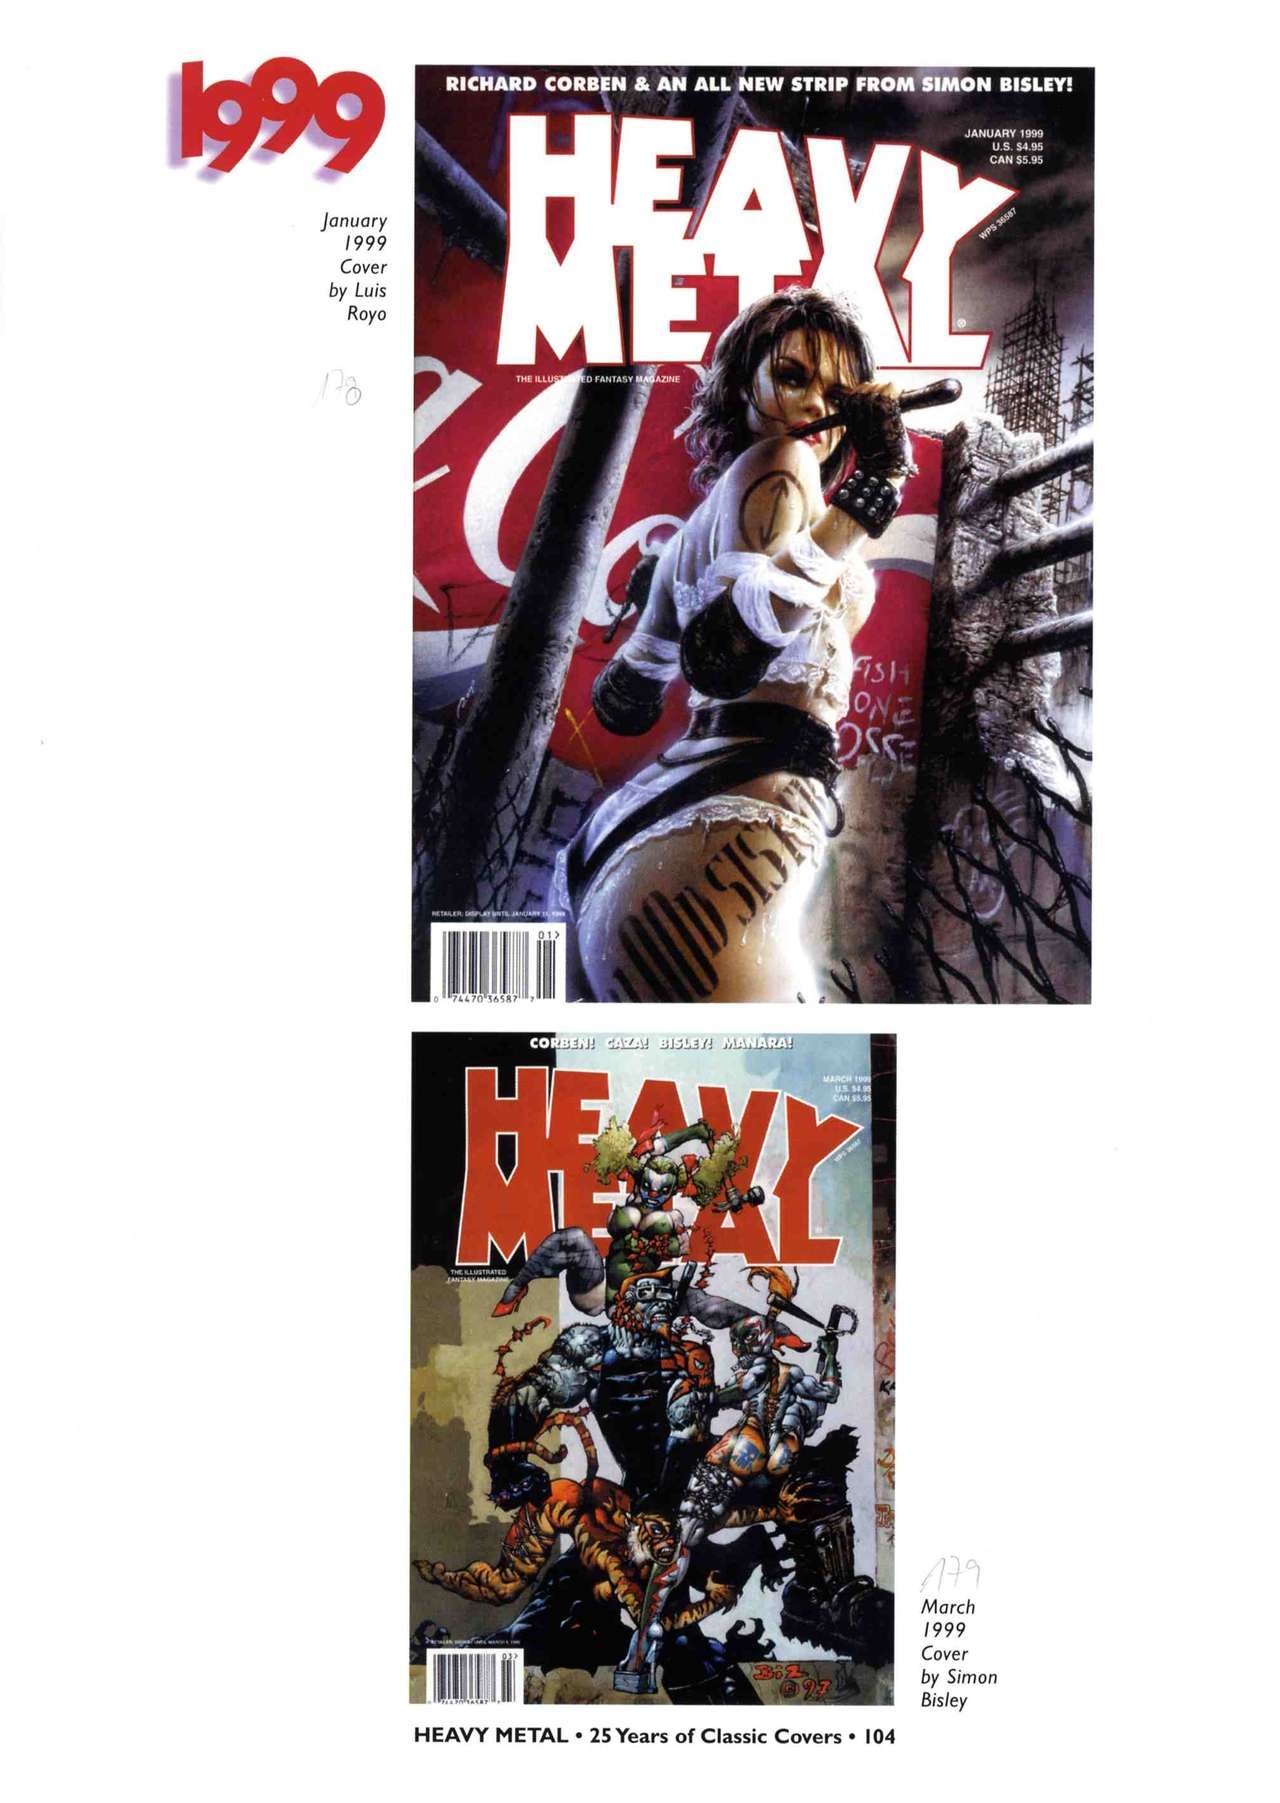 HEAVY METAL 25 Years of Classic Covers 109